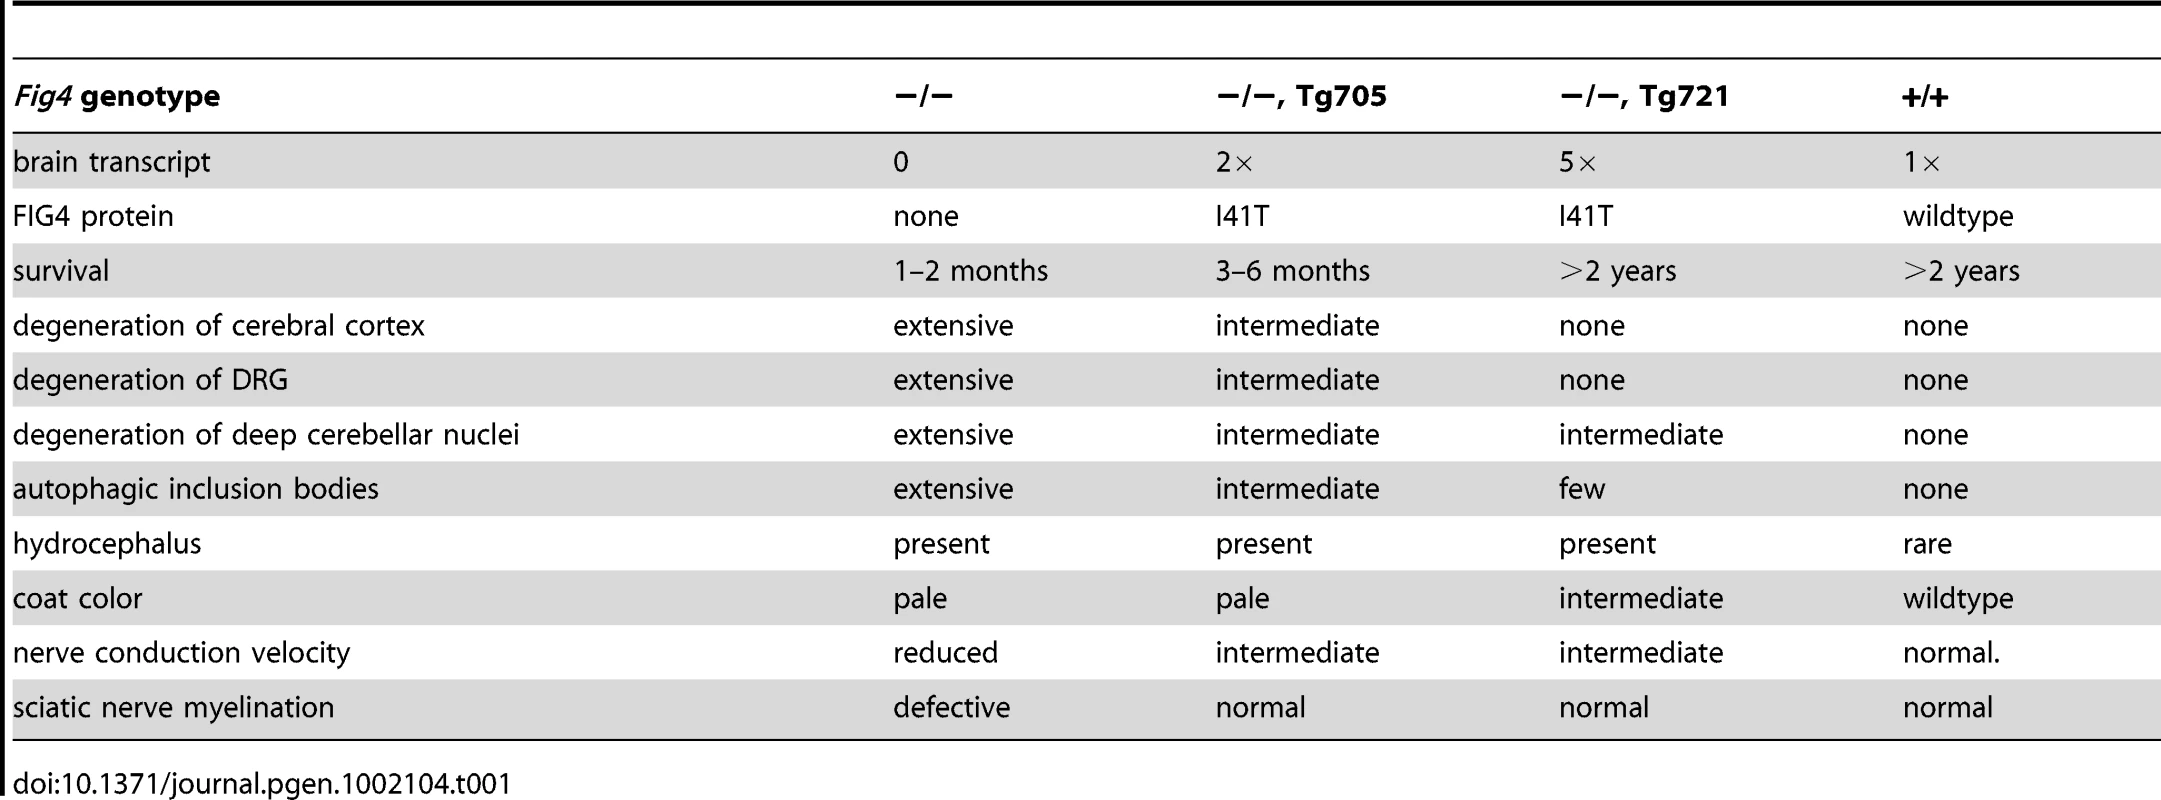 Rescue of various phenotypes of the &lt;i&gt;Fig4&lt;/i&gt; null mice by the Tg705 and Tg721 I41T transgenes.